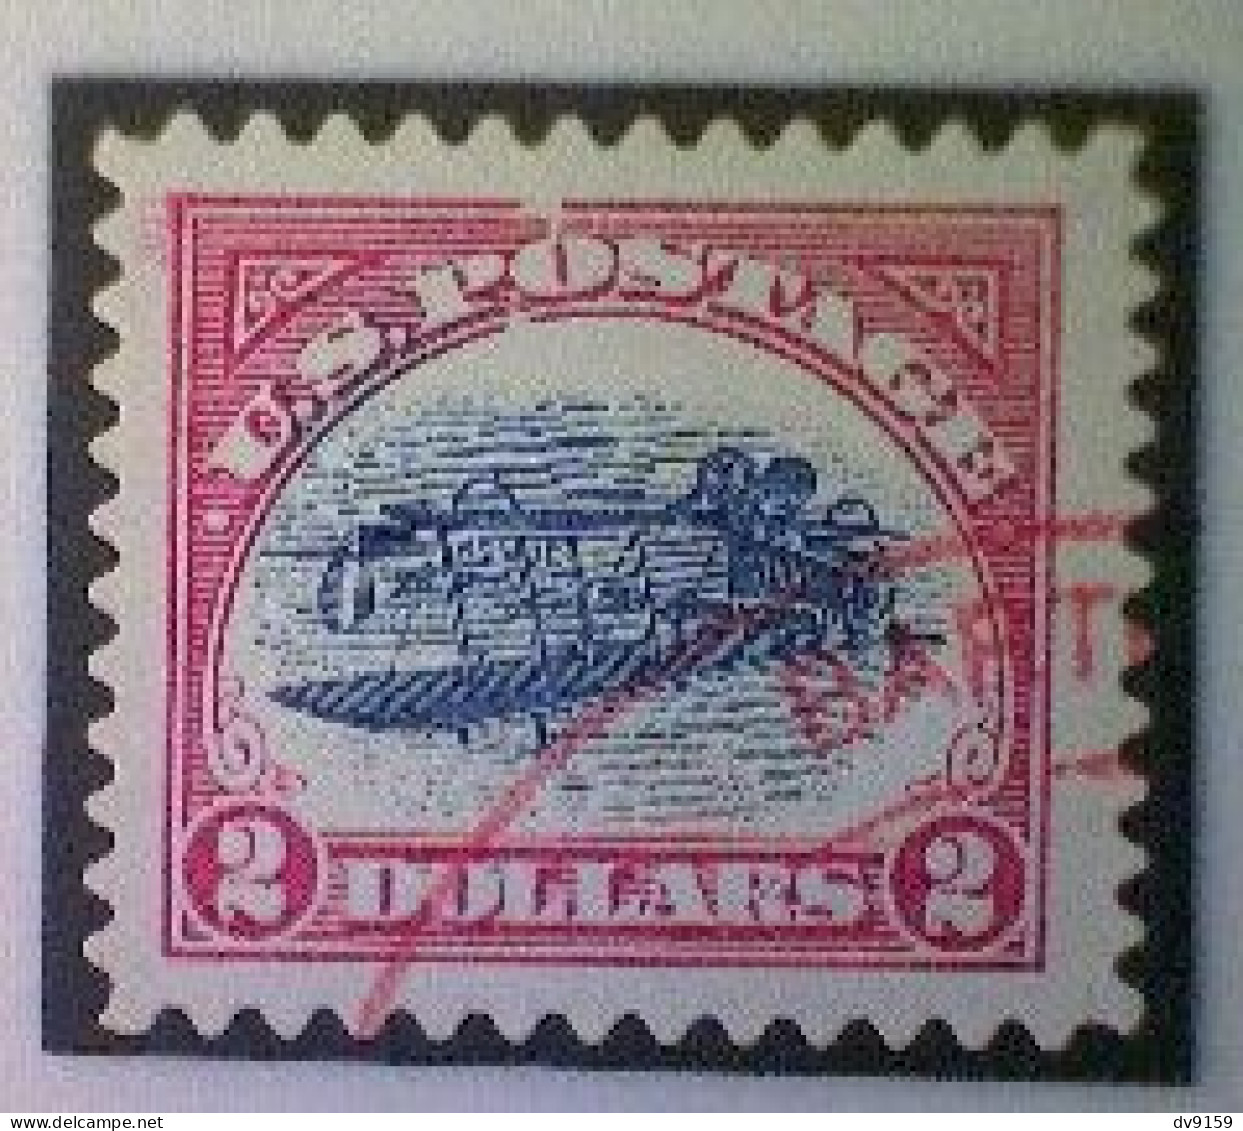 United States, Scott #4806a, Used(o), 2013, Inverted Jenny, Single, $2, Blue, Black, And Red - Oblitérés